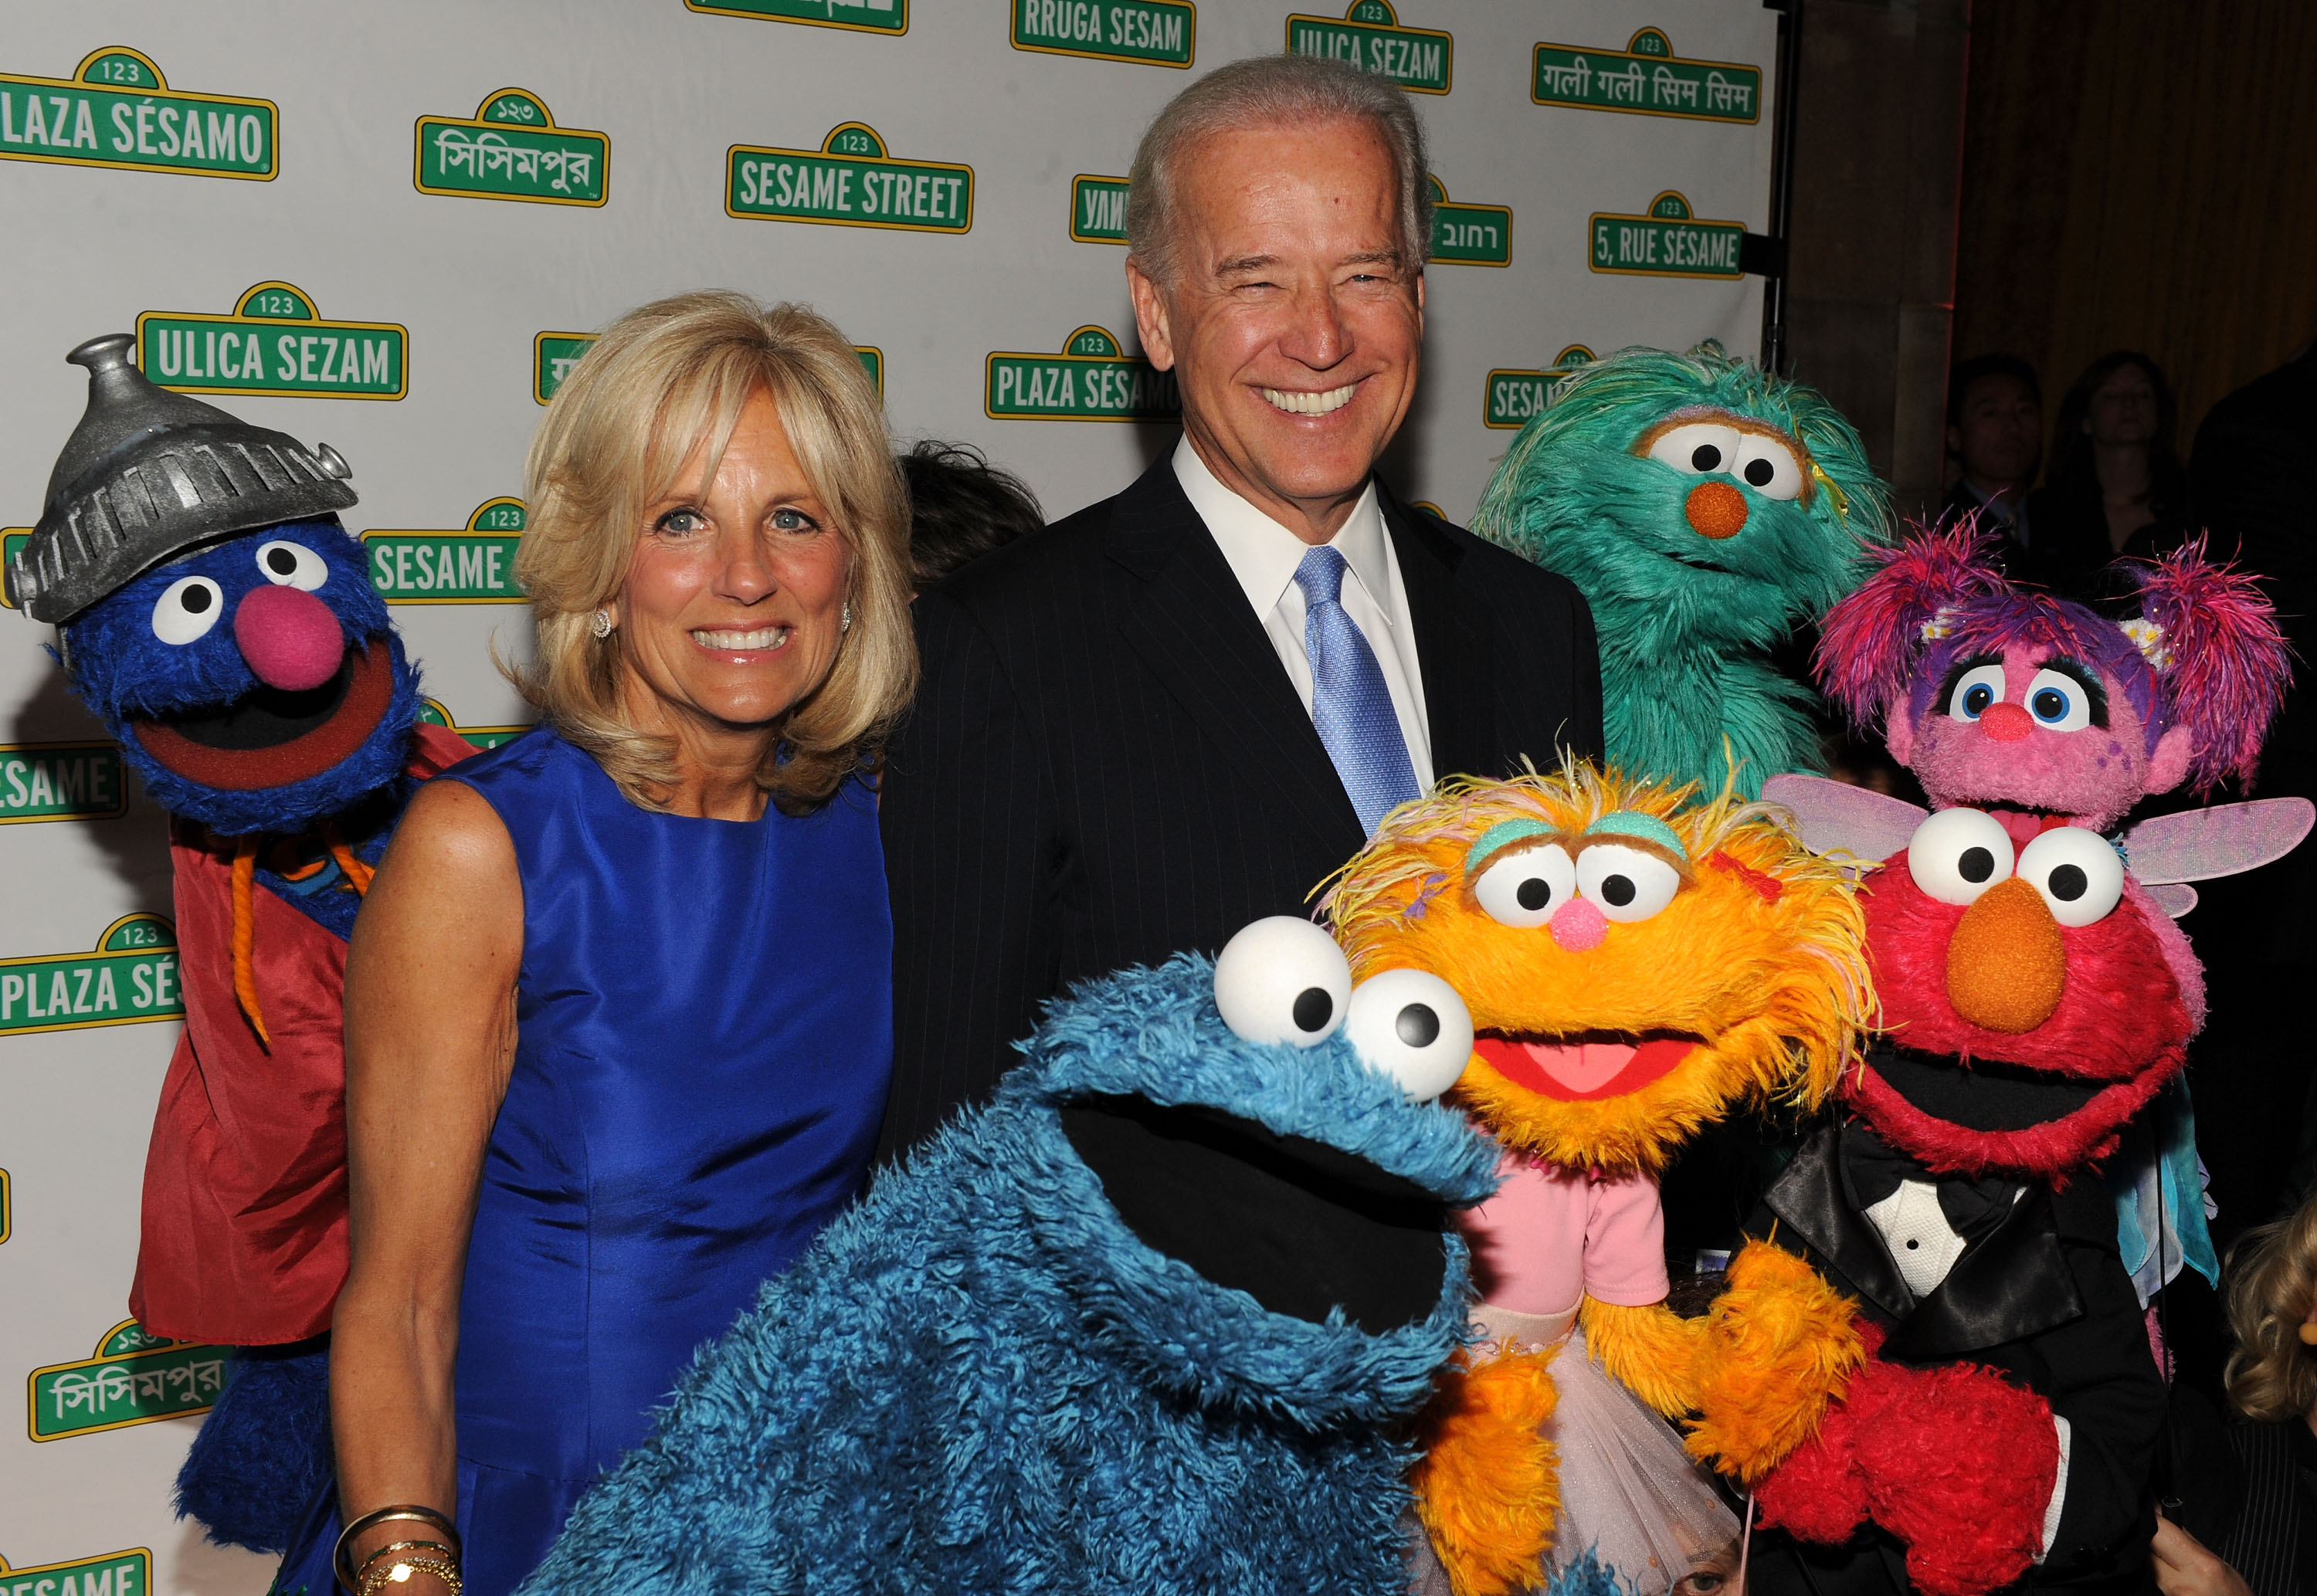 Vice President Joe Biden and Dr. Jill Biden attend Sesame Workshop's 8th Annual Benefit Gala in New York City. (Photo by Bryan Bedder/Getty Images) (Bryan Bedder&mdash;Getty Images)